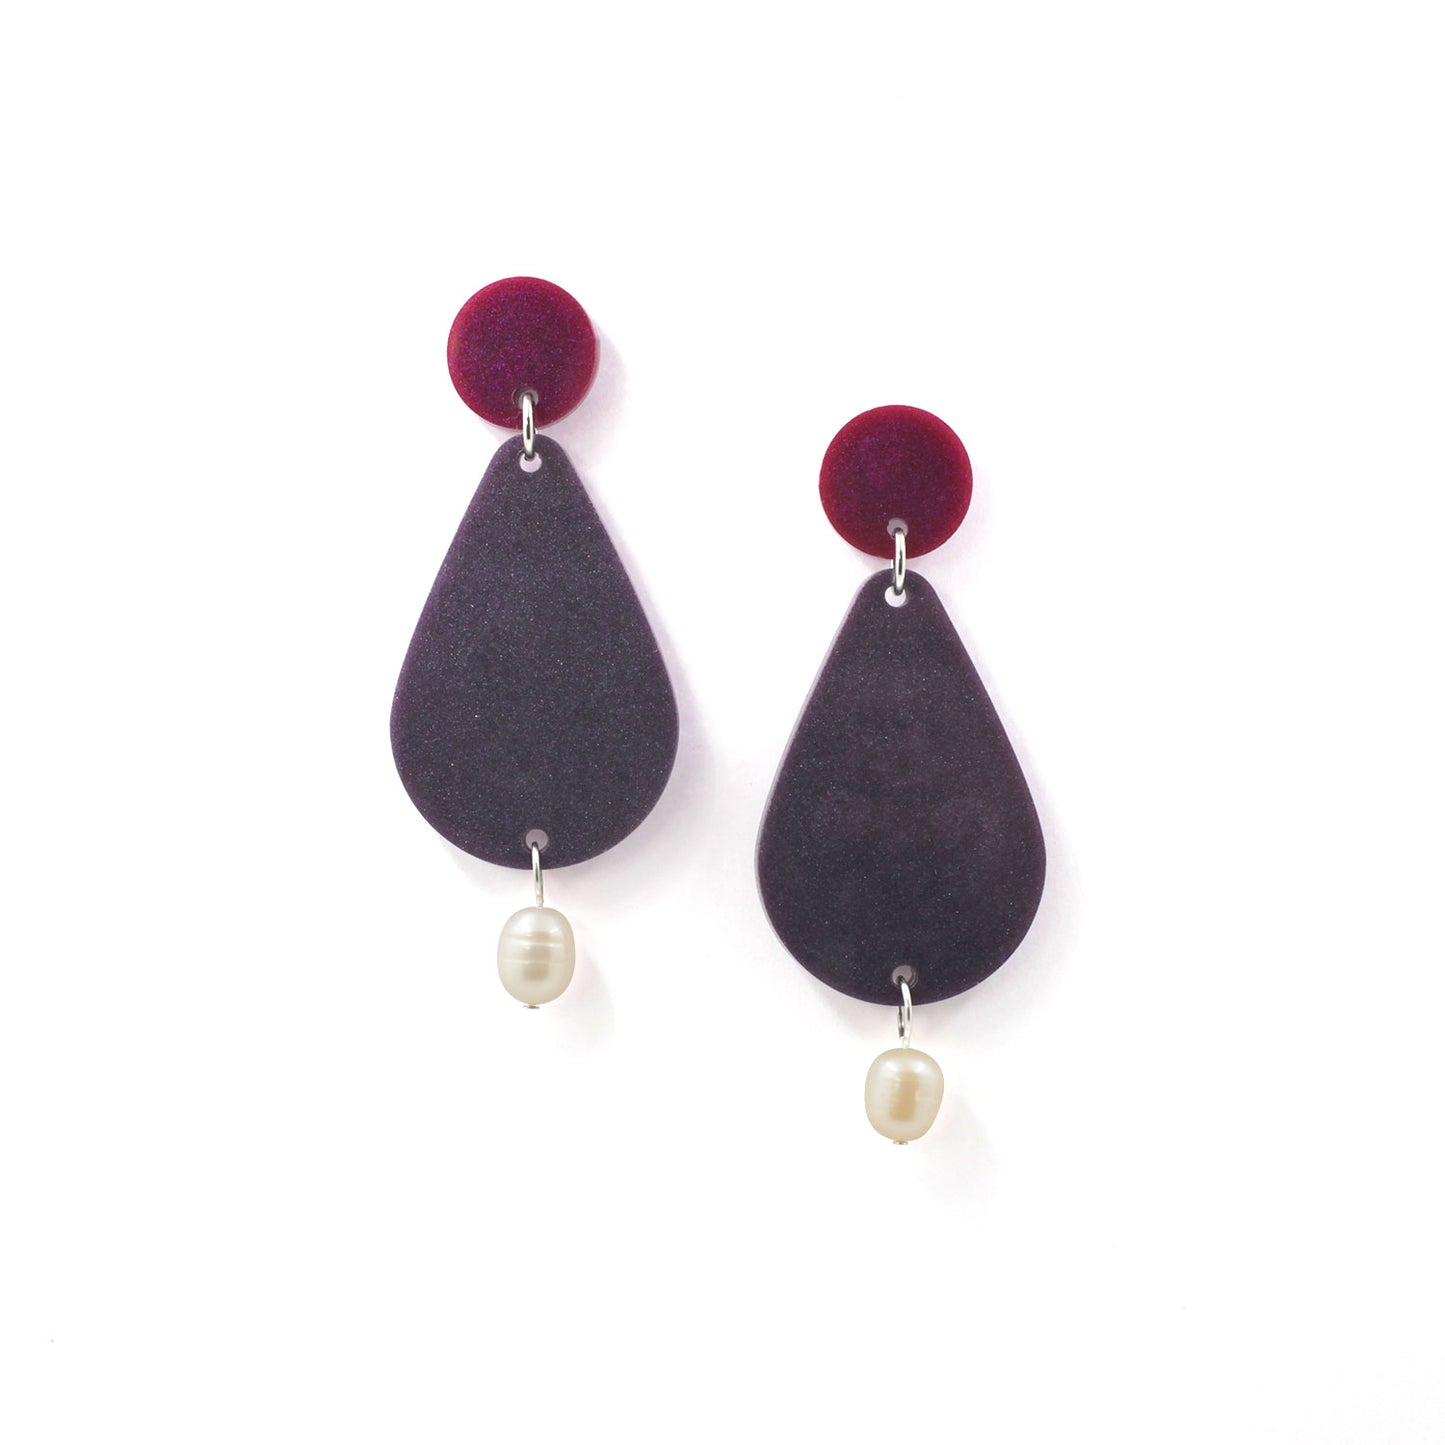 picture of earrings on a white background. the earrings are composed by a pink dot at the top, then a bigger purple pear shape and a freshwater pearls at the bottom hanging. 